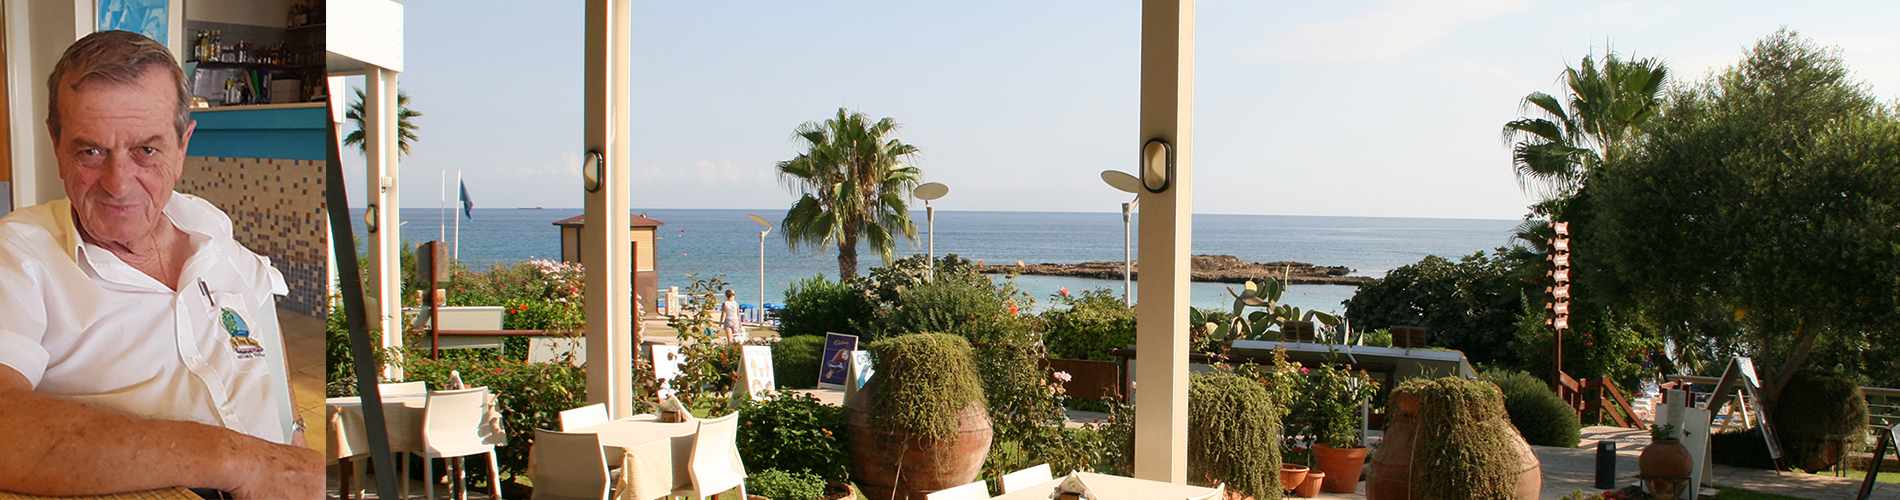 Interview with the owner of Fig Tree Bay Restaurant in Protaras